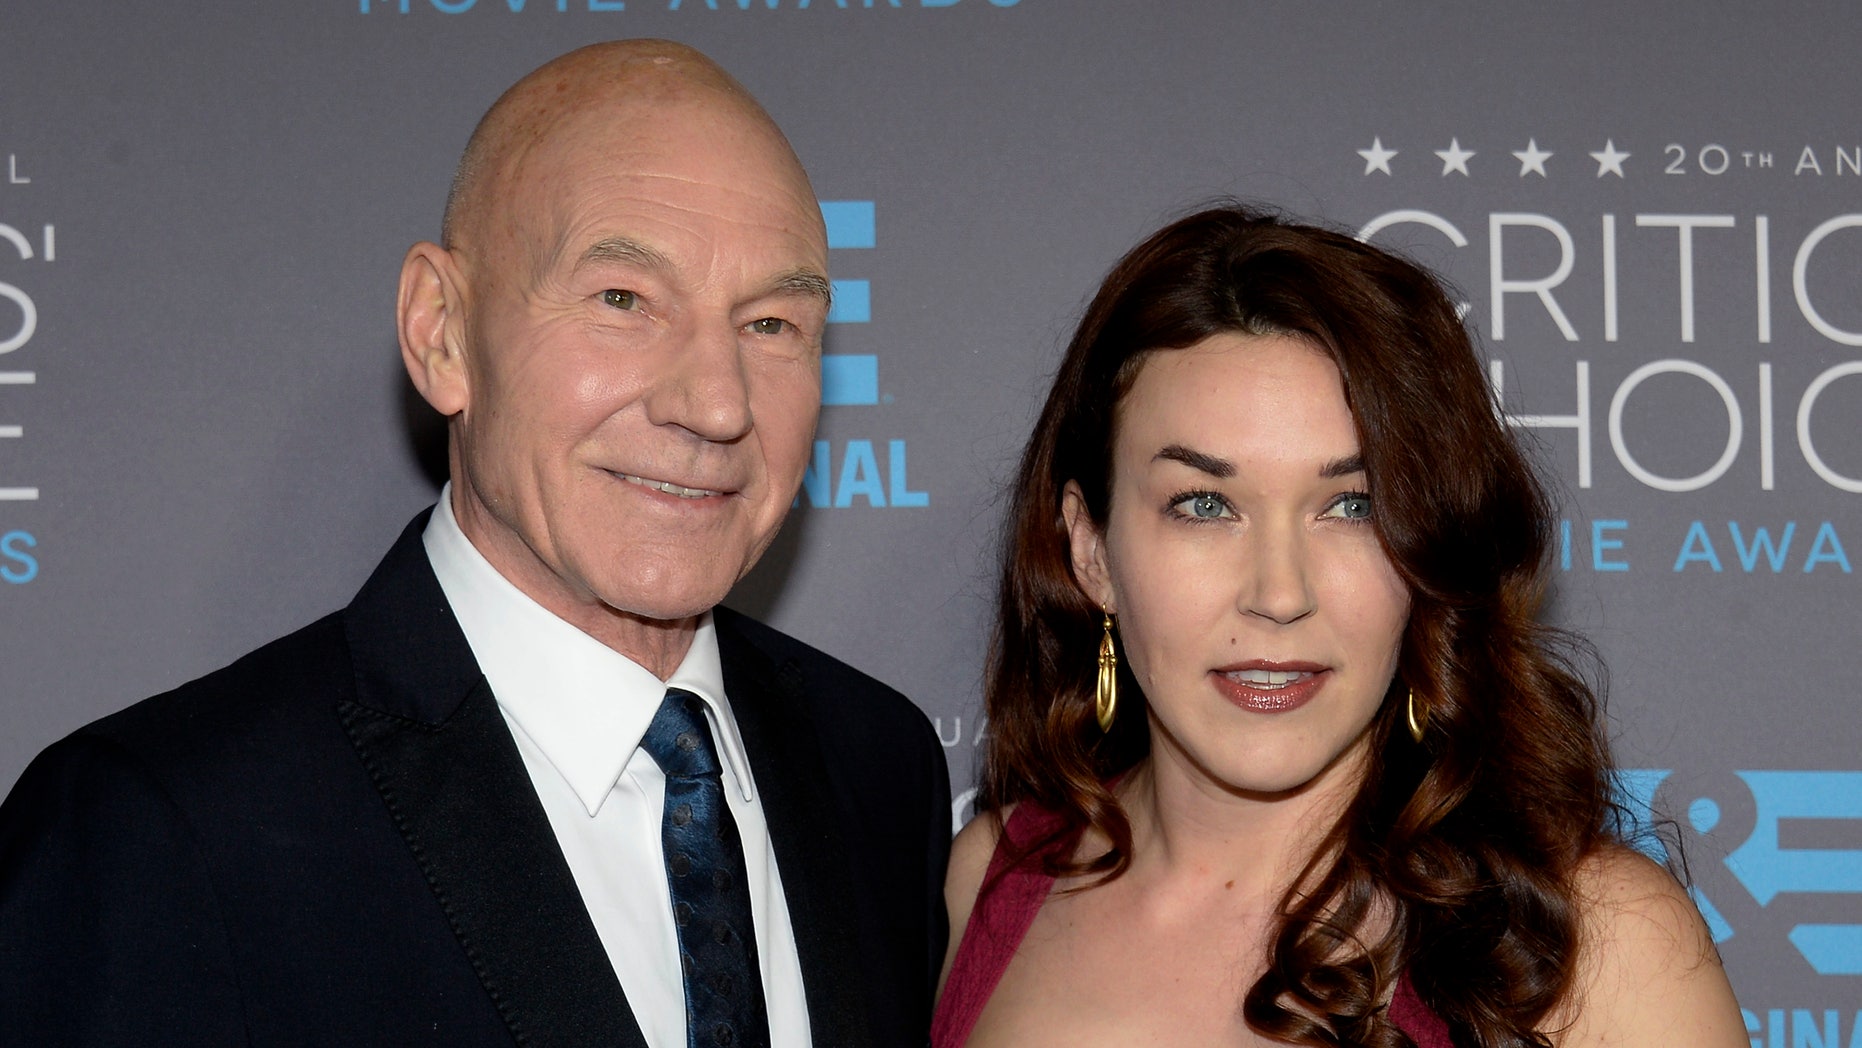 Patrick Stewart says its an honor to be mistaken as a gay man Fox News